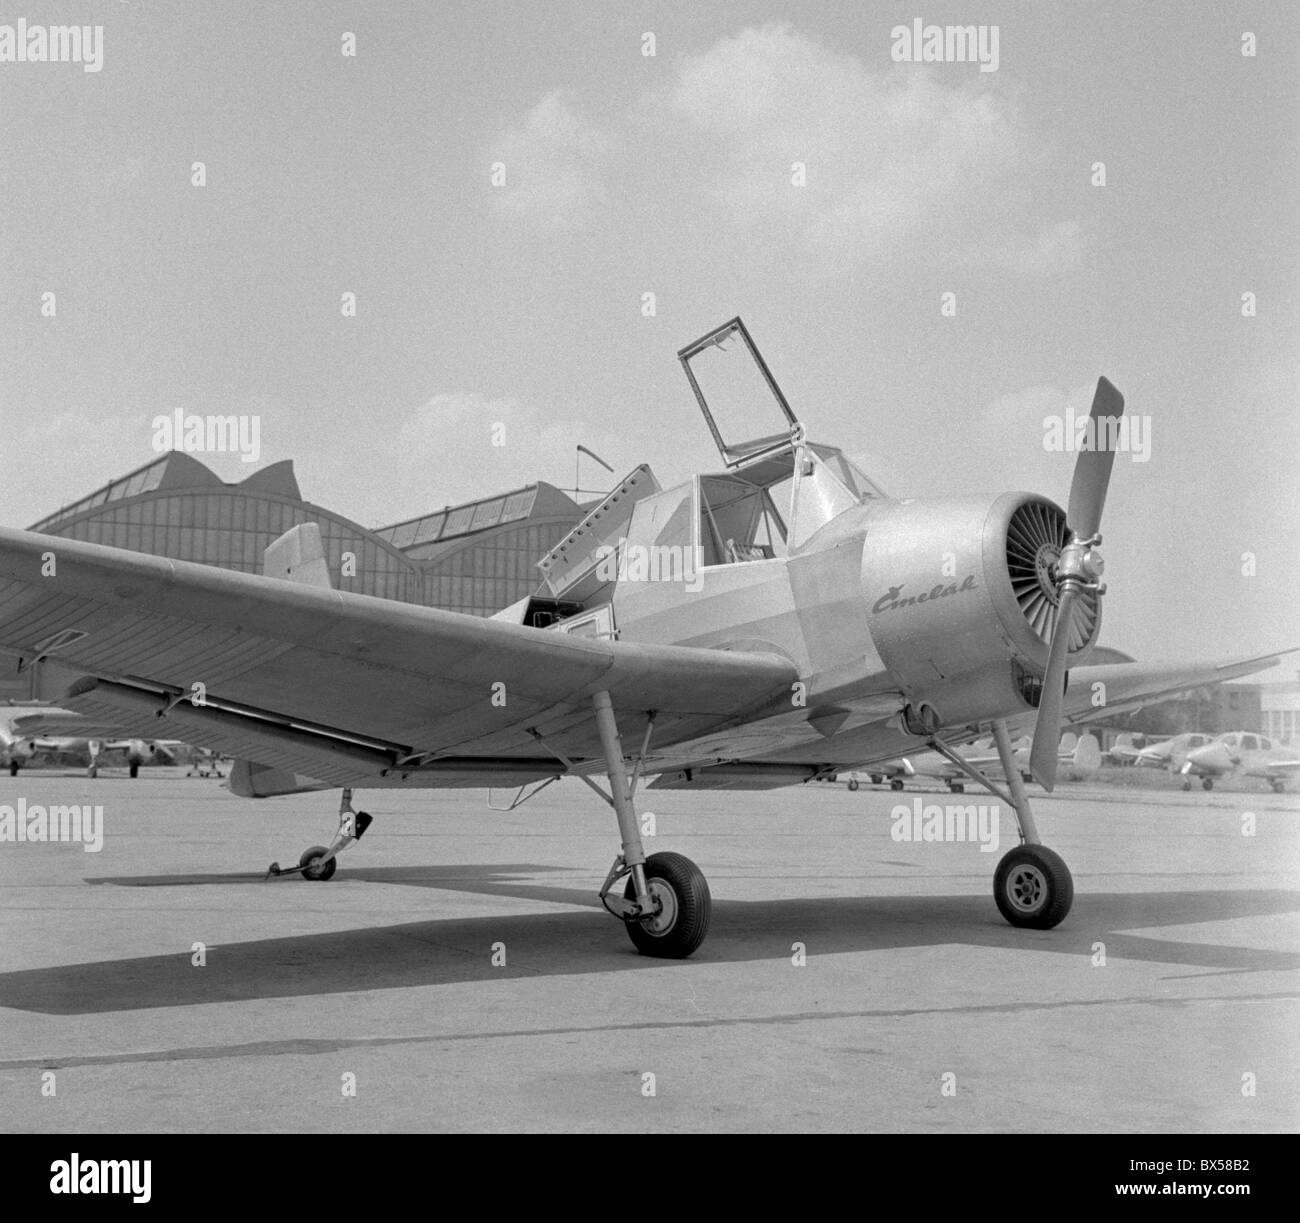 Prototype of agricultural aircraft 'Cmelak' XL37 (bumblebee) in Kunovice, Czechoslovakia 1963. (CTK Photo / Emil Bican) Stock Photo